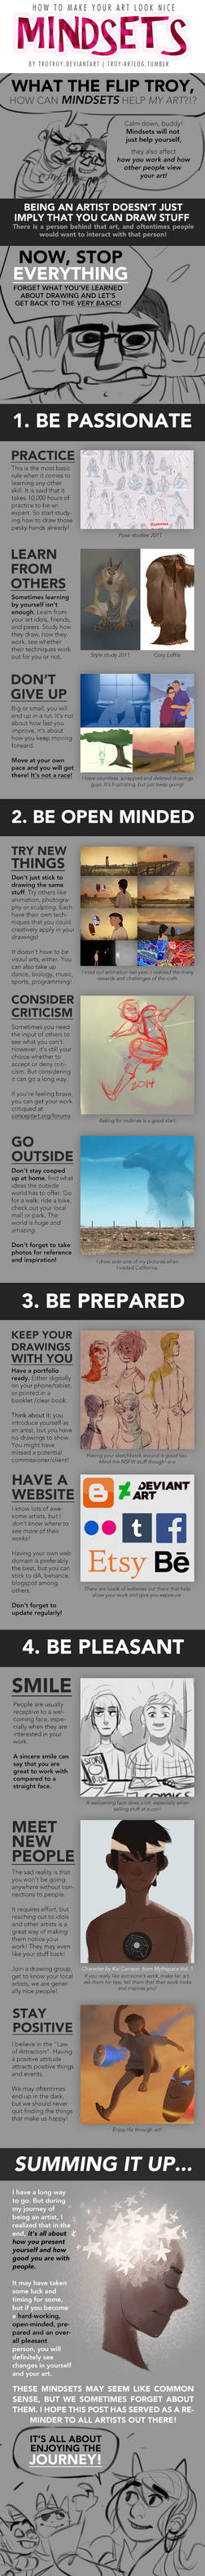 HOW TO MAKE YOUR ART LOOK NICE: Mindsets